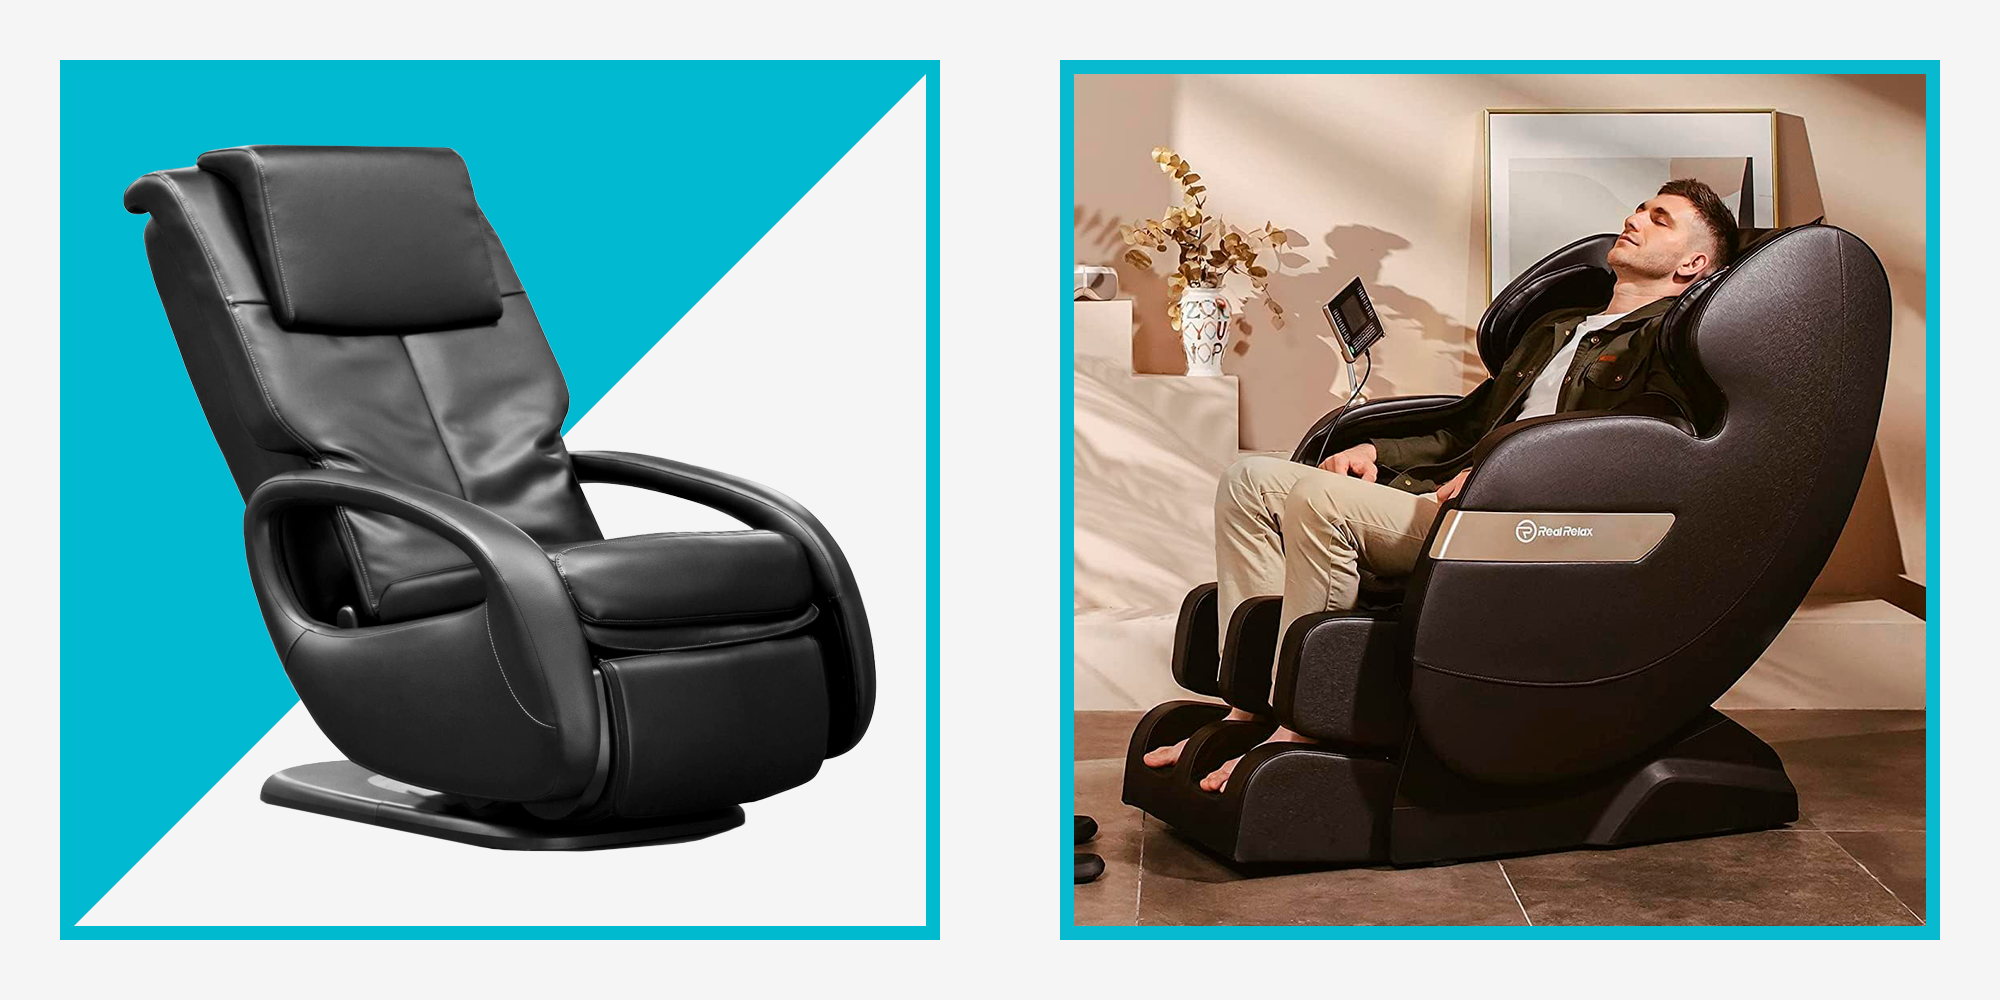 https://hips.hearstapps.com/hmg-prod/images/mh-8-14-massage-chairs-64da7577f31f5.png